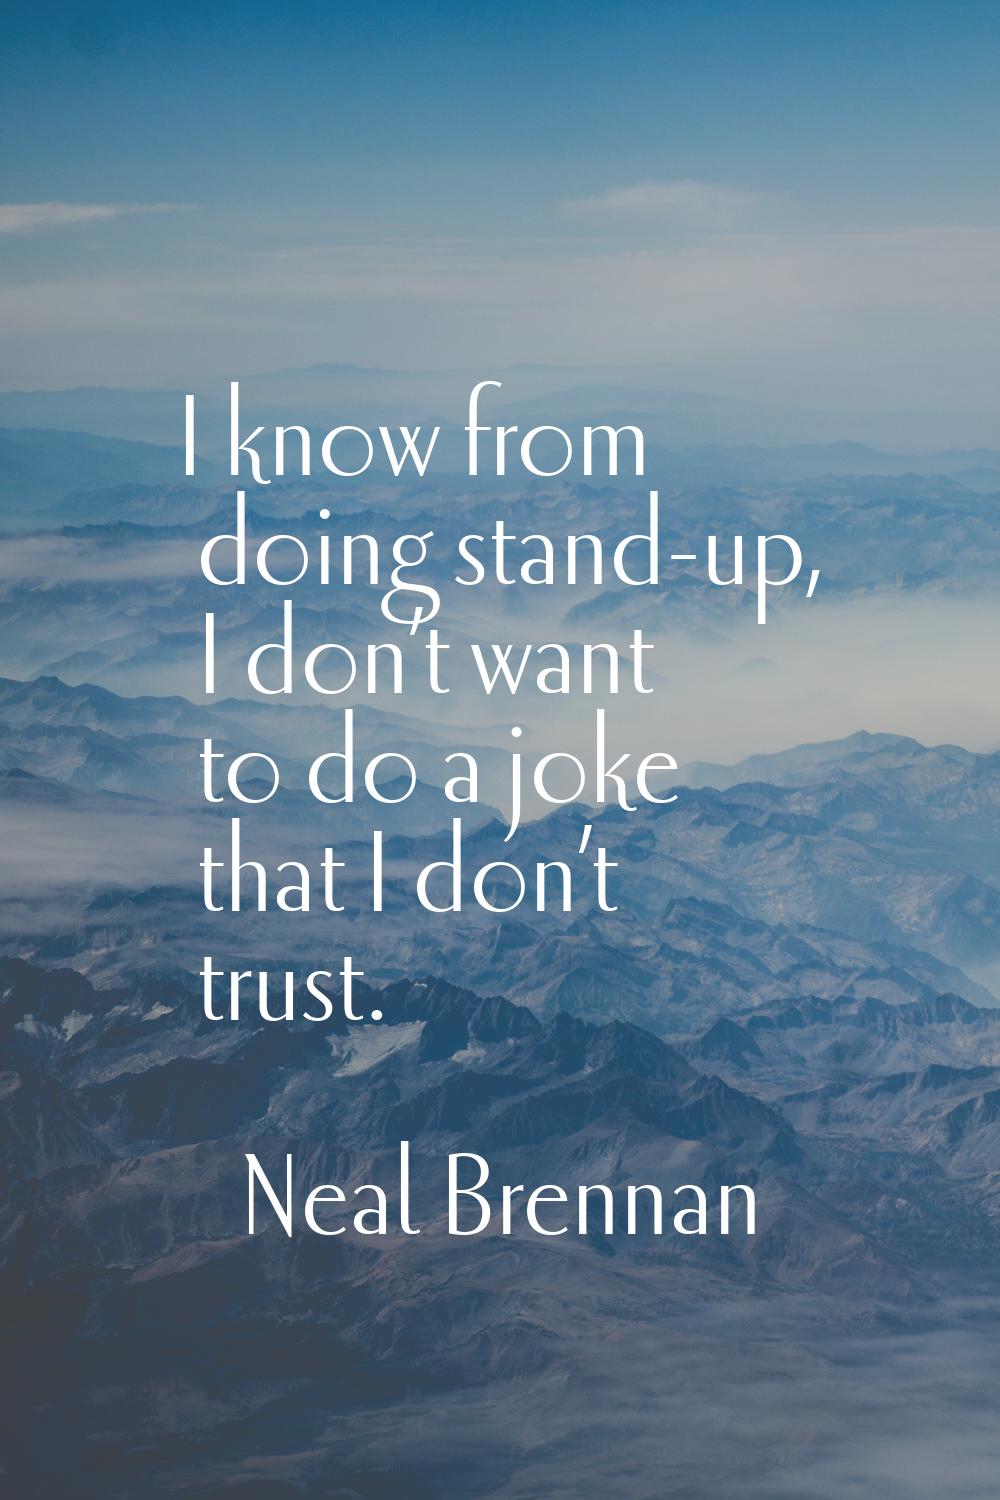 I know from doing stand-up, I don’t want to do a joke that I don’t trust.